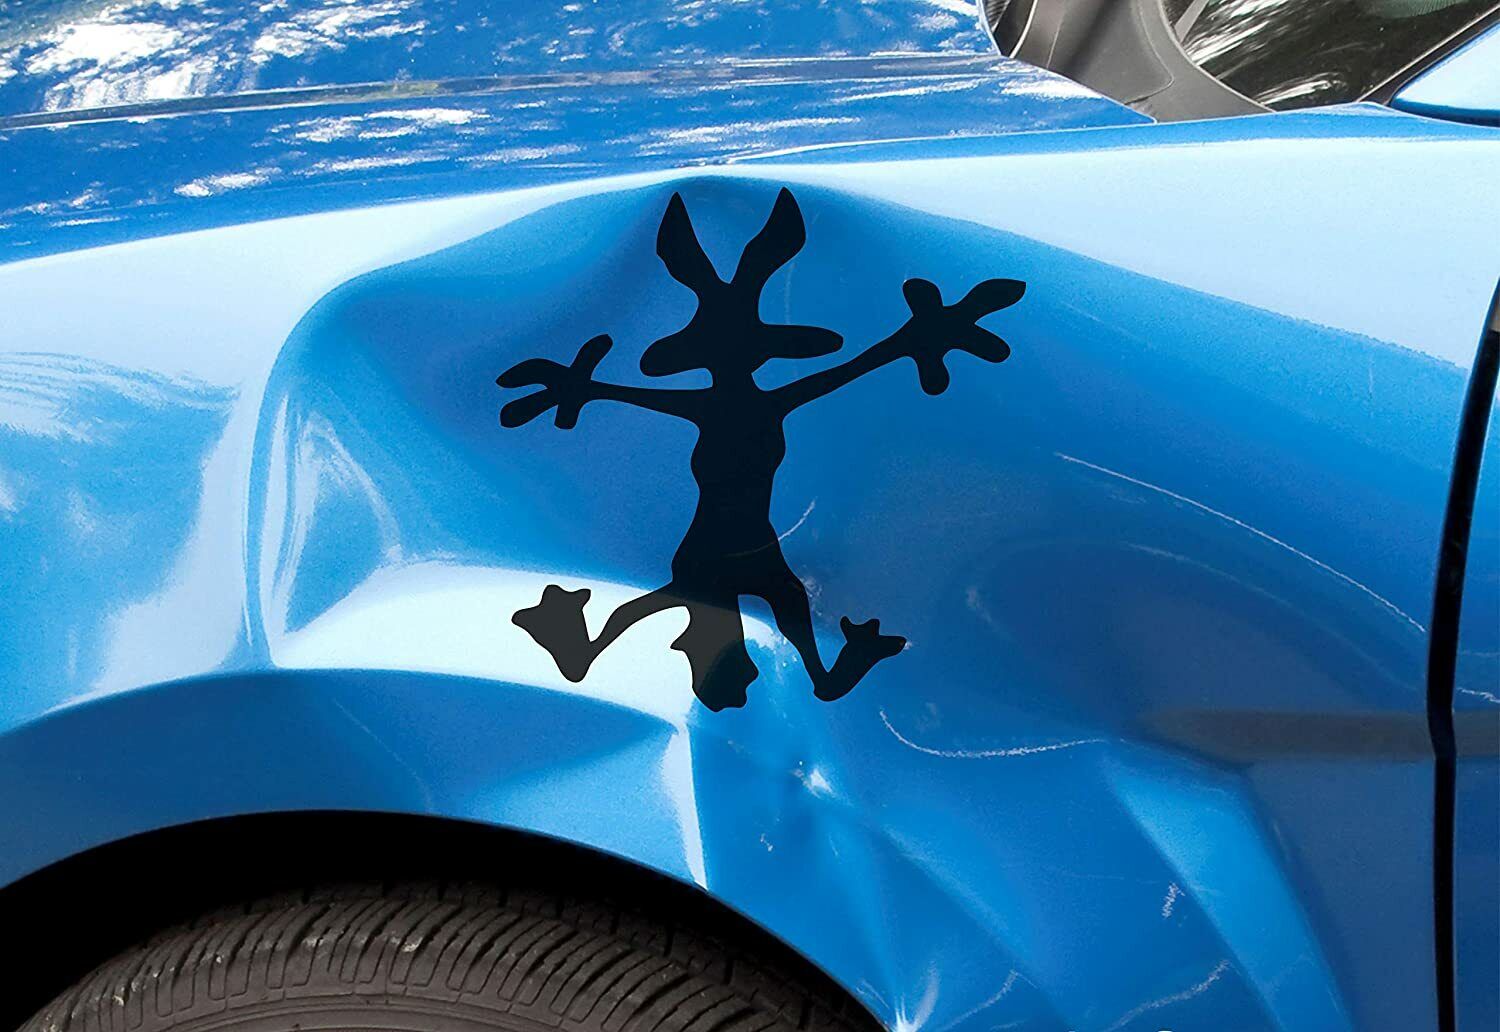 Wile E Coyote Splat Vinyl Sticker Decal For Car Window Great for Dents